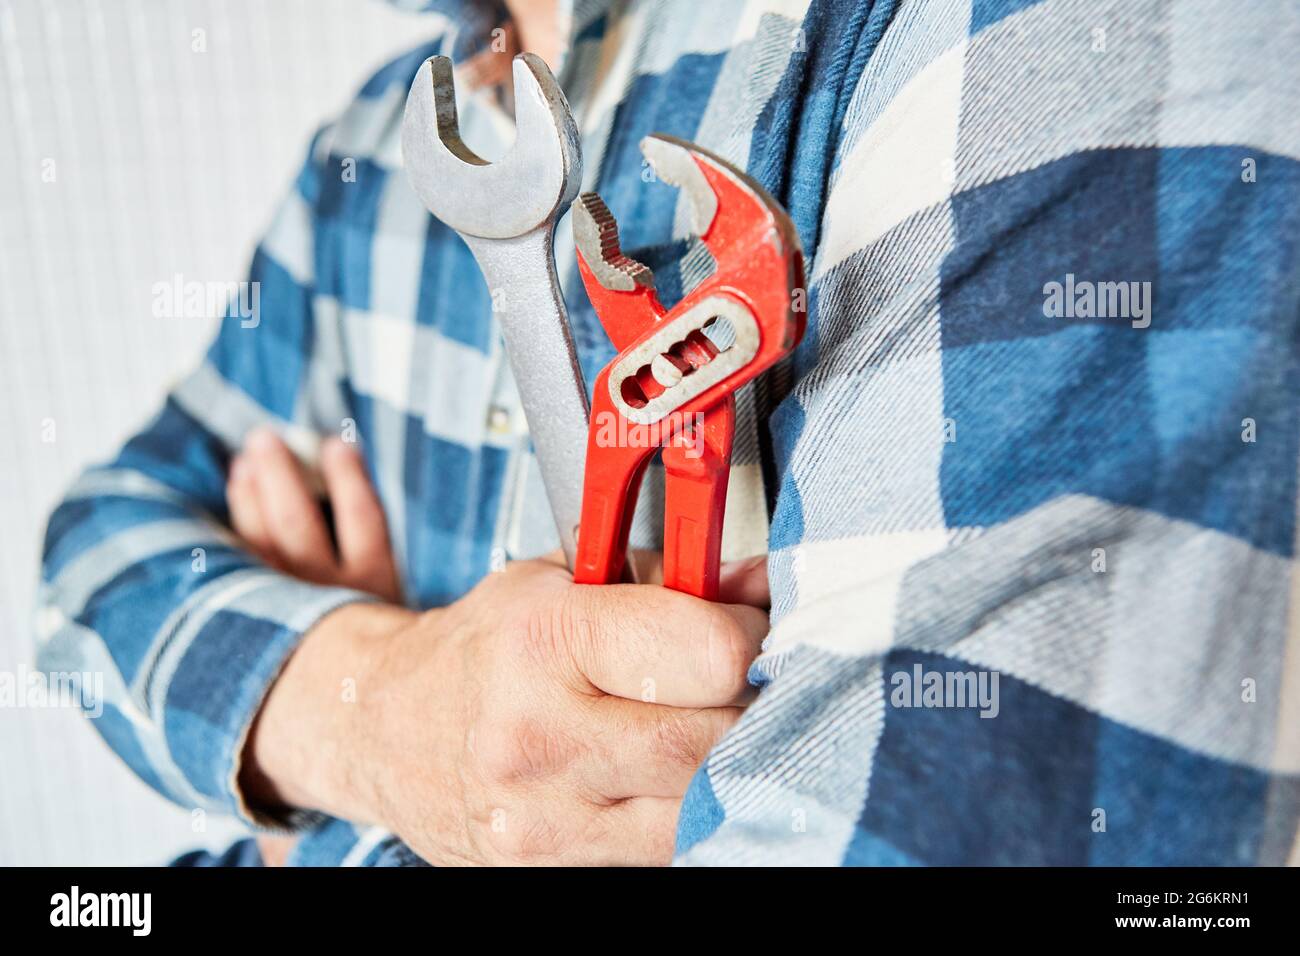 Craftsman with open-end wrench and pipe wrench as a symbol for craft and service Stock Photo